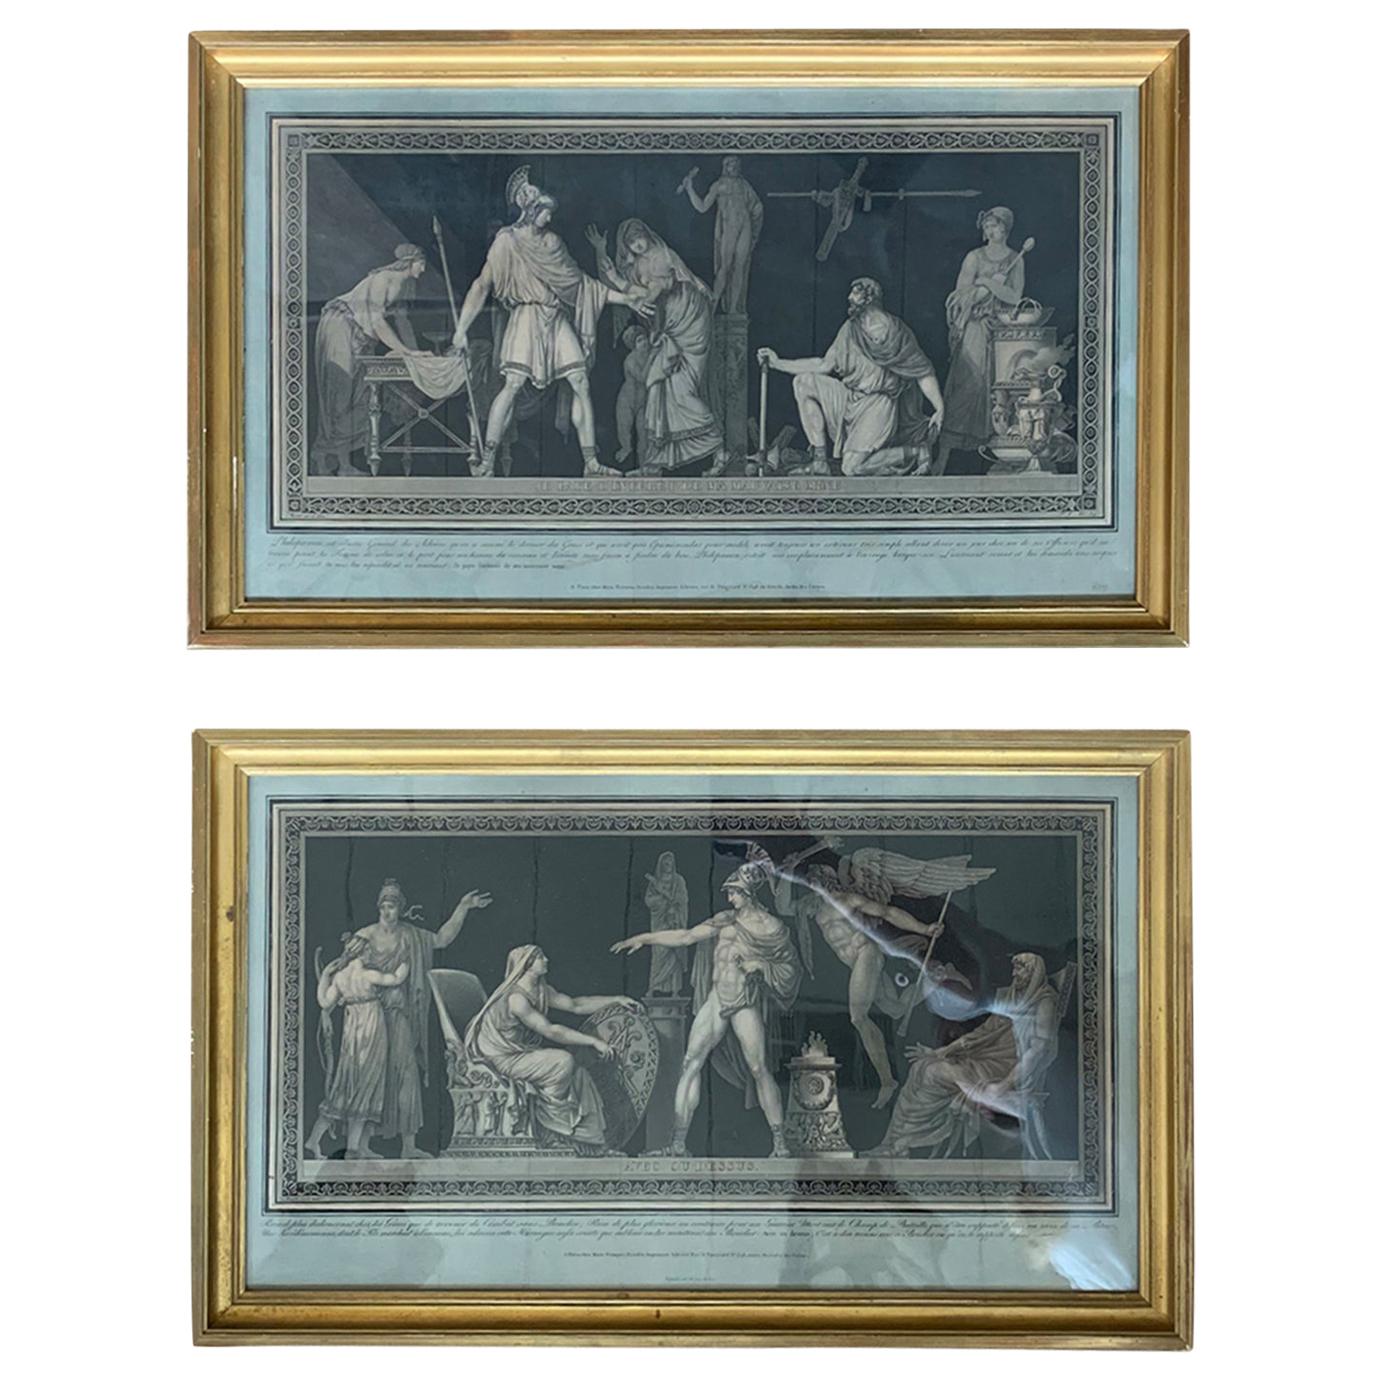 Pair of French Neoclassical Military Engravings by Pierre Michel Alix circa 1795